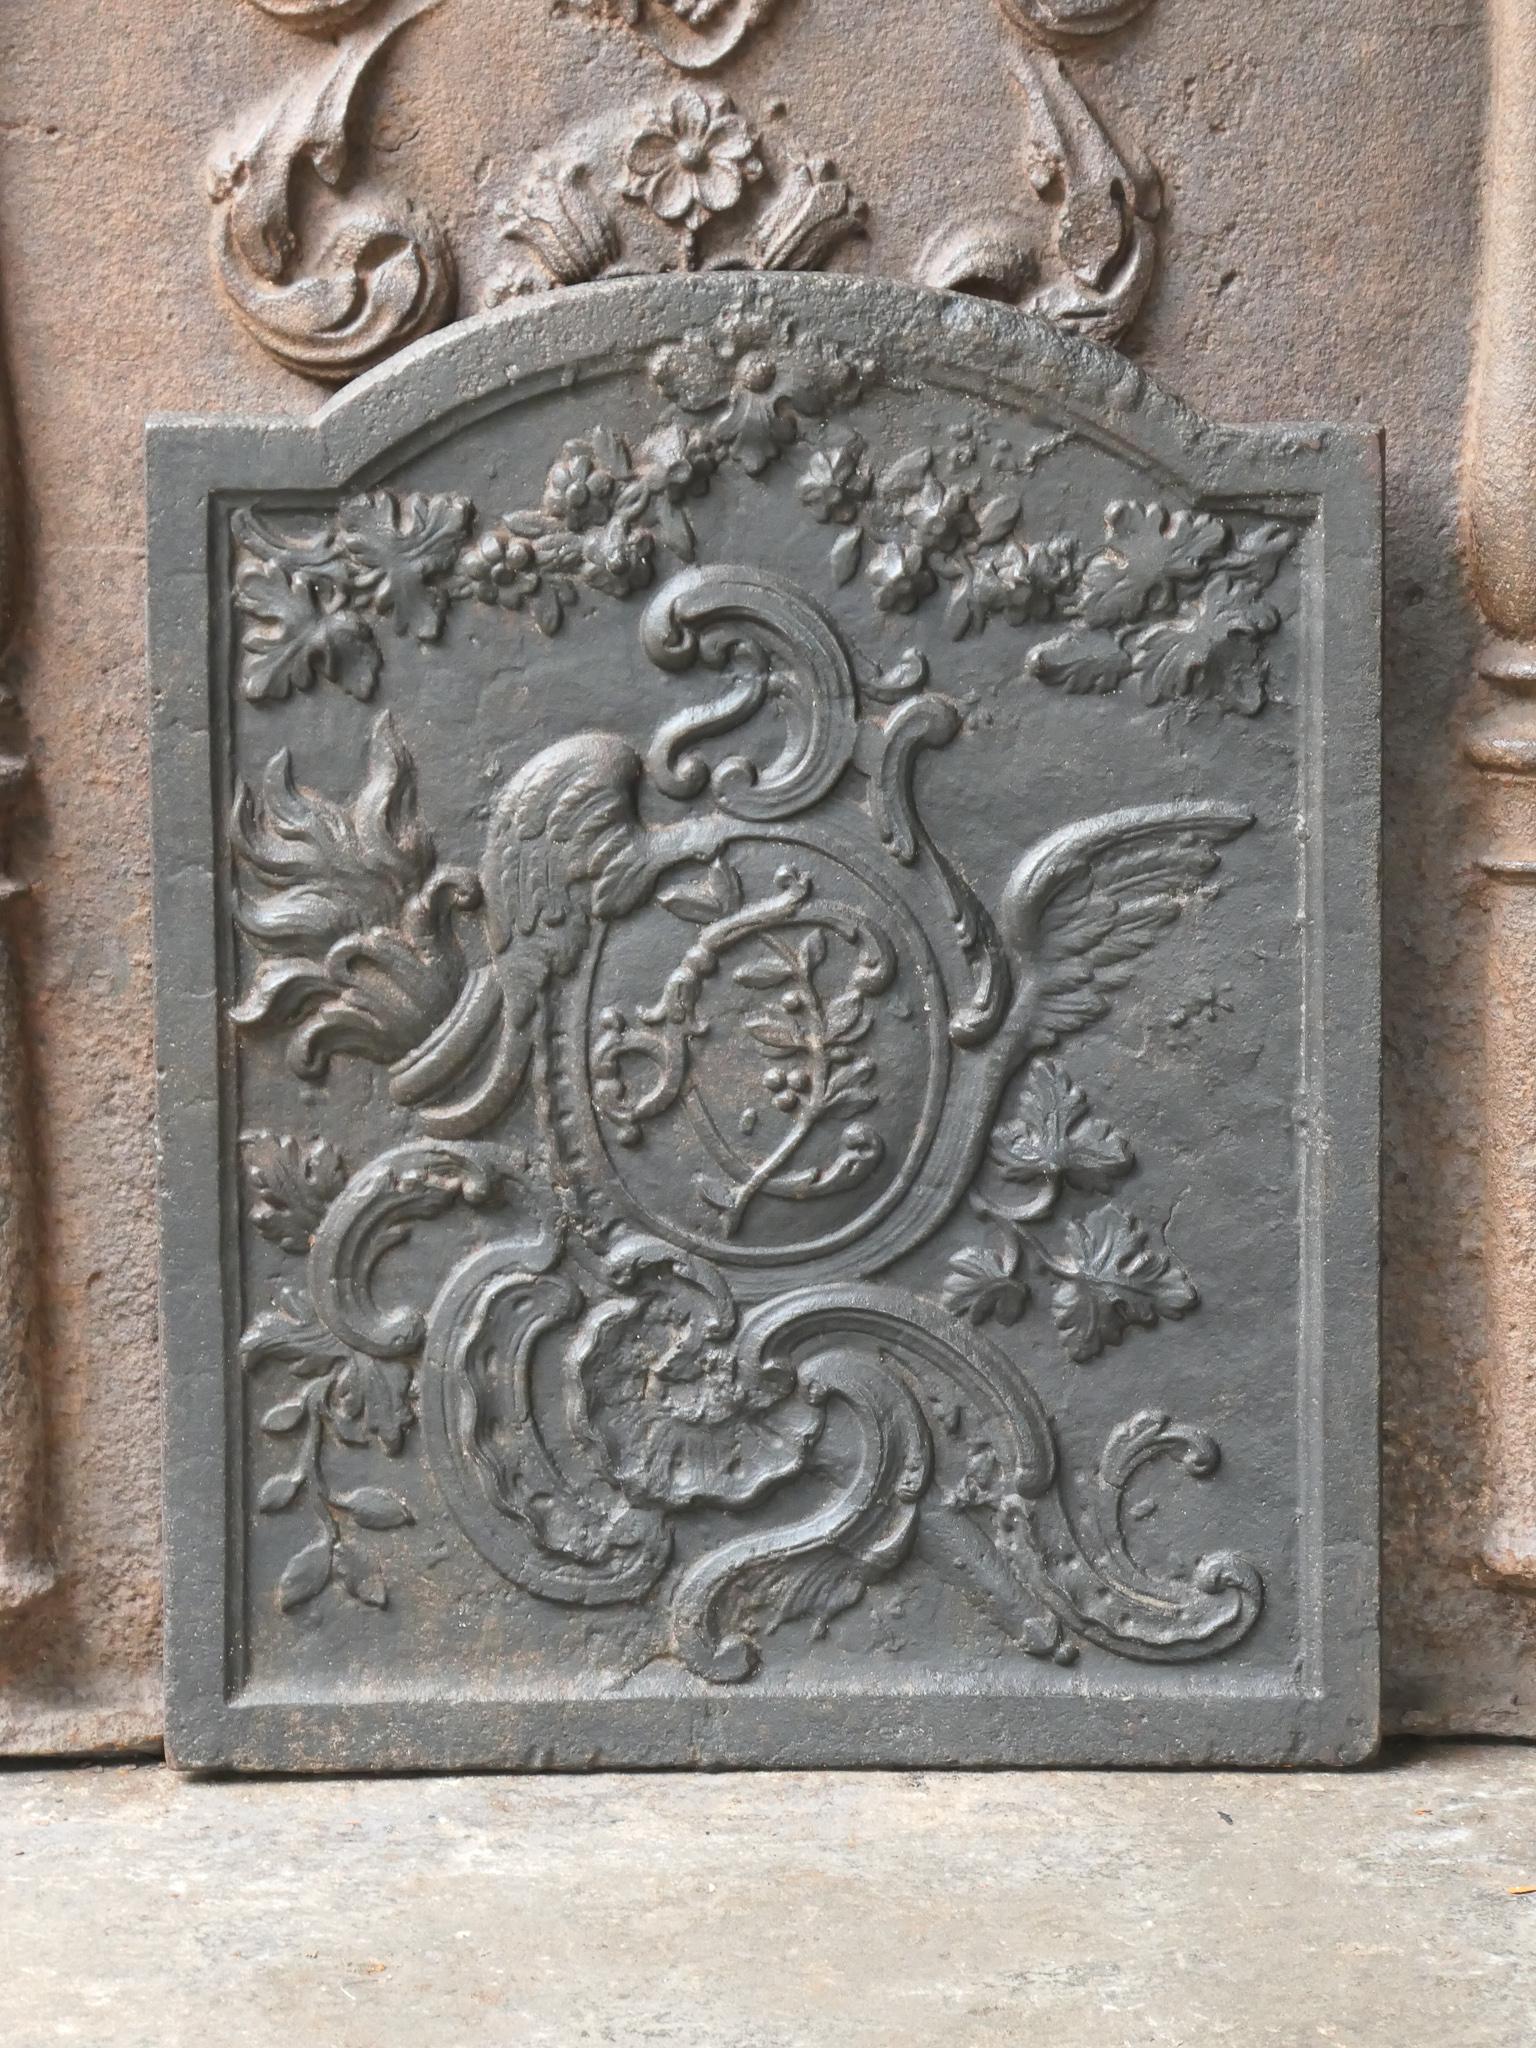 18th century French Louis XV period fireback. The fireback is made of cast iron and has a black / pewter patina. The condition is good, no cracks.